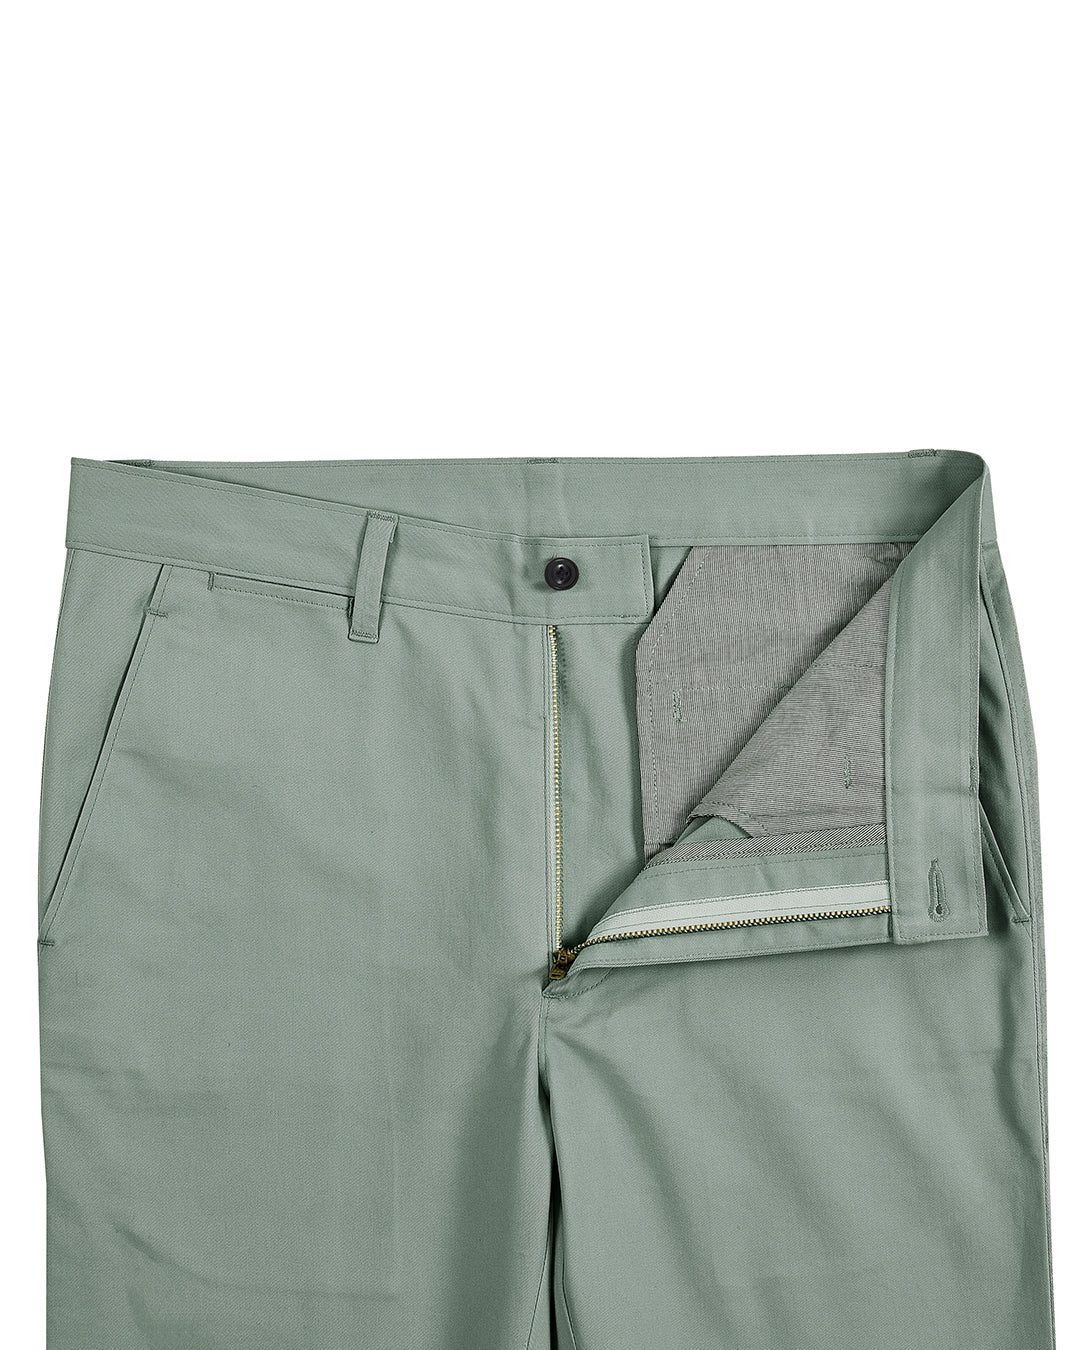 Front open view of custom Genoa Chino pants for men by Luxire in pistachio green